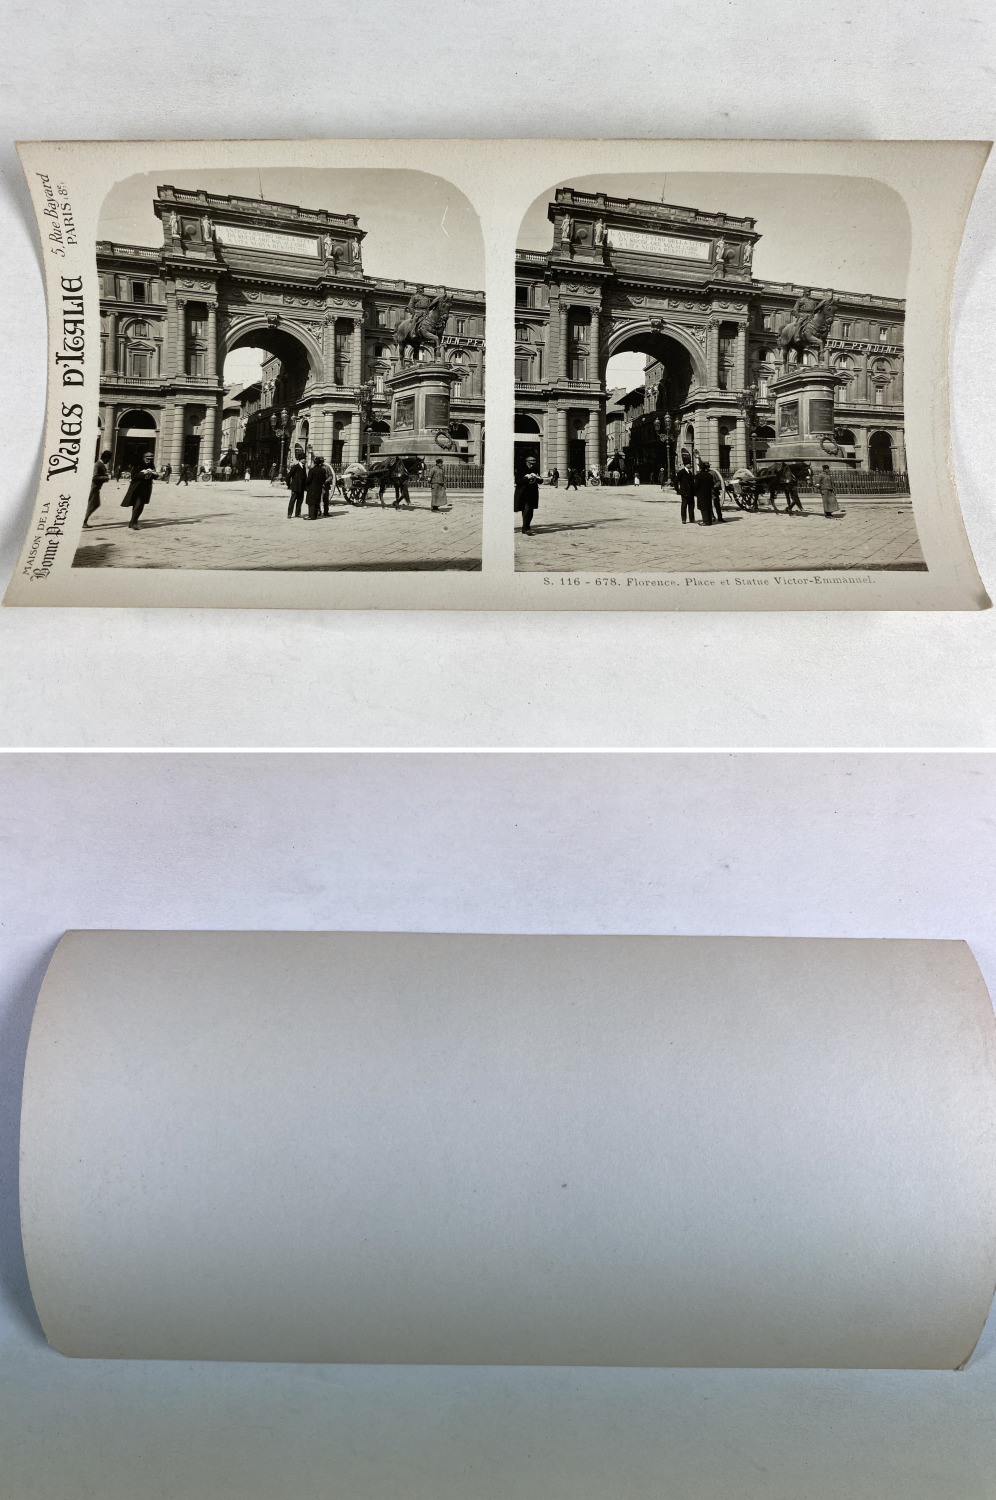 Florence, Place & Statue Victor-Emmanuel, Vintage Silver Print, ca.1910, Stereo